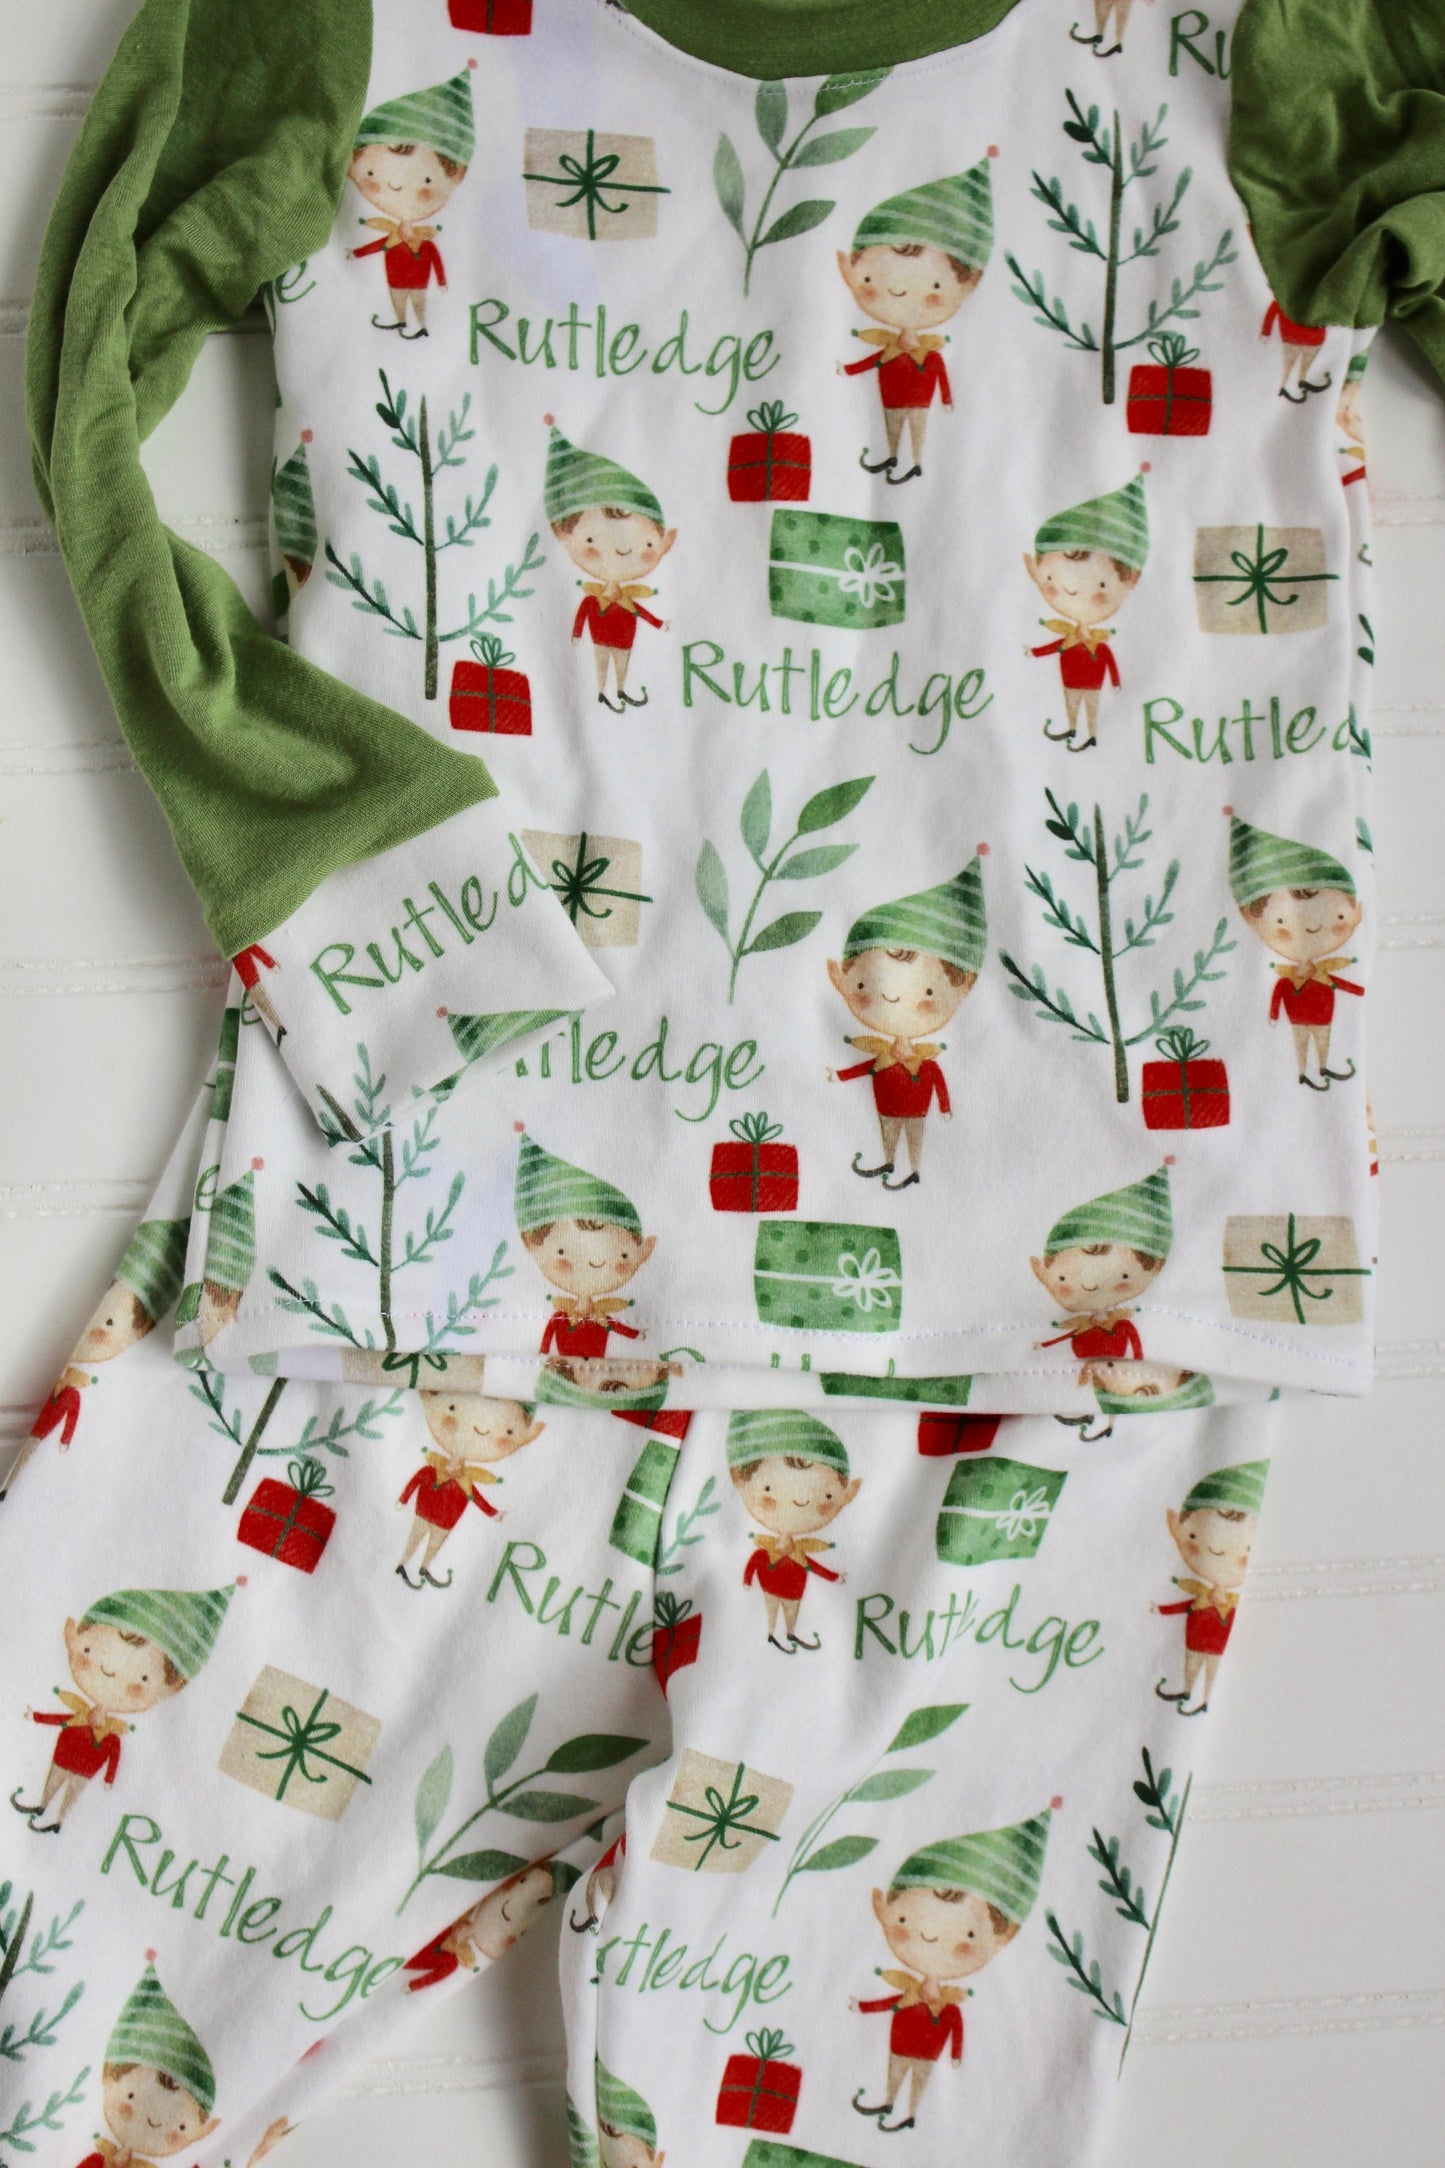 Personalized Christmas Pajamas for Infants, Children, and Families with Elves, Snowman, Reindeer, Santa, Holly, and Candy Canes